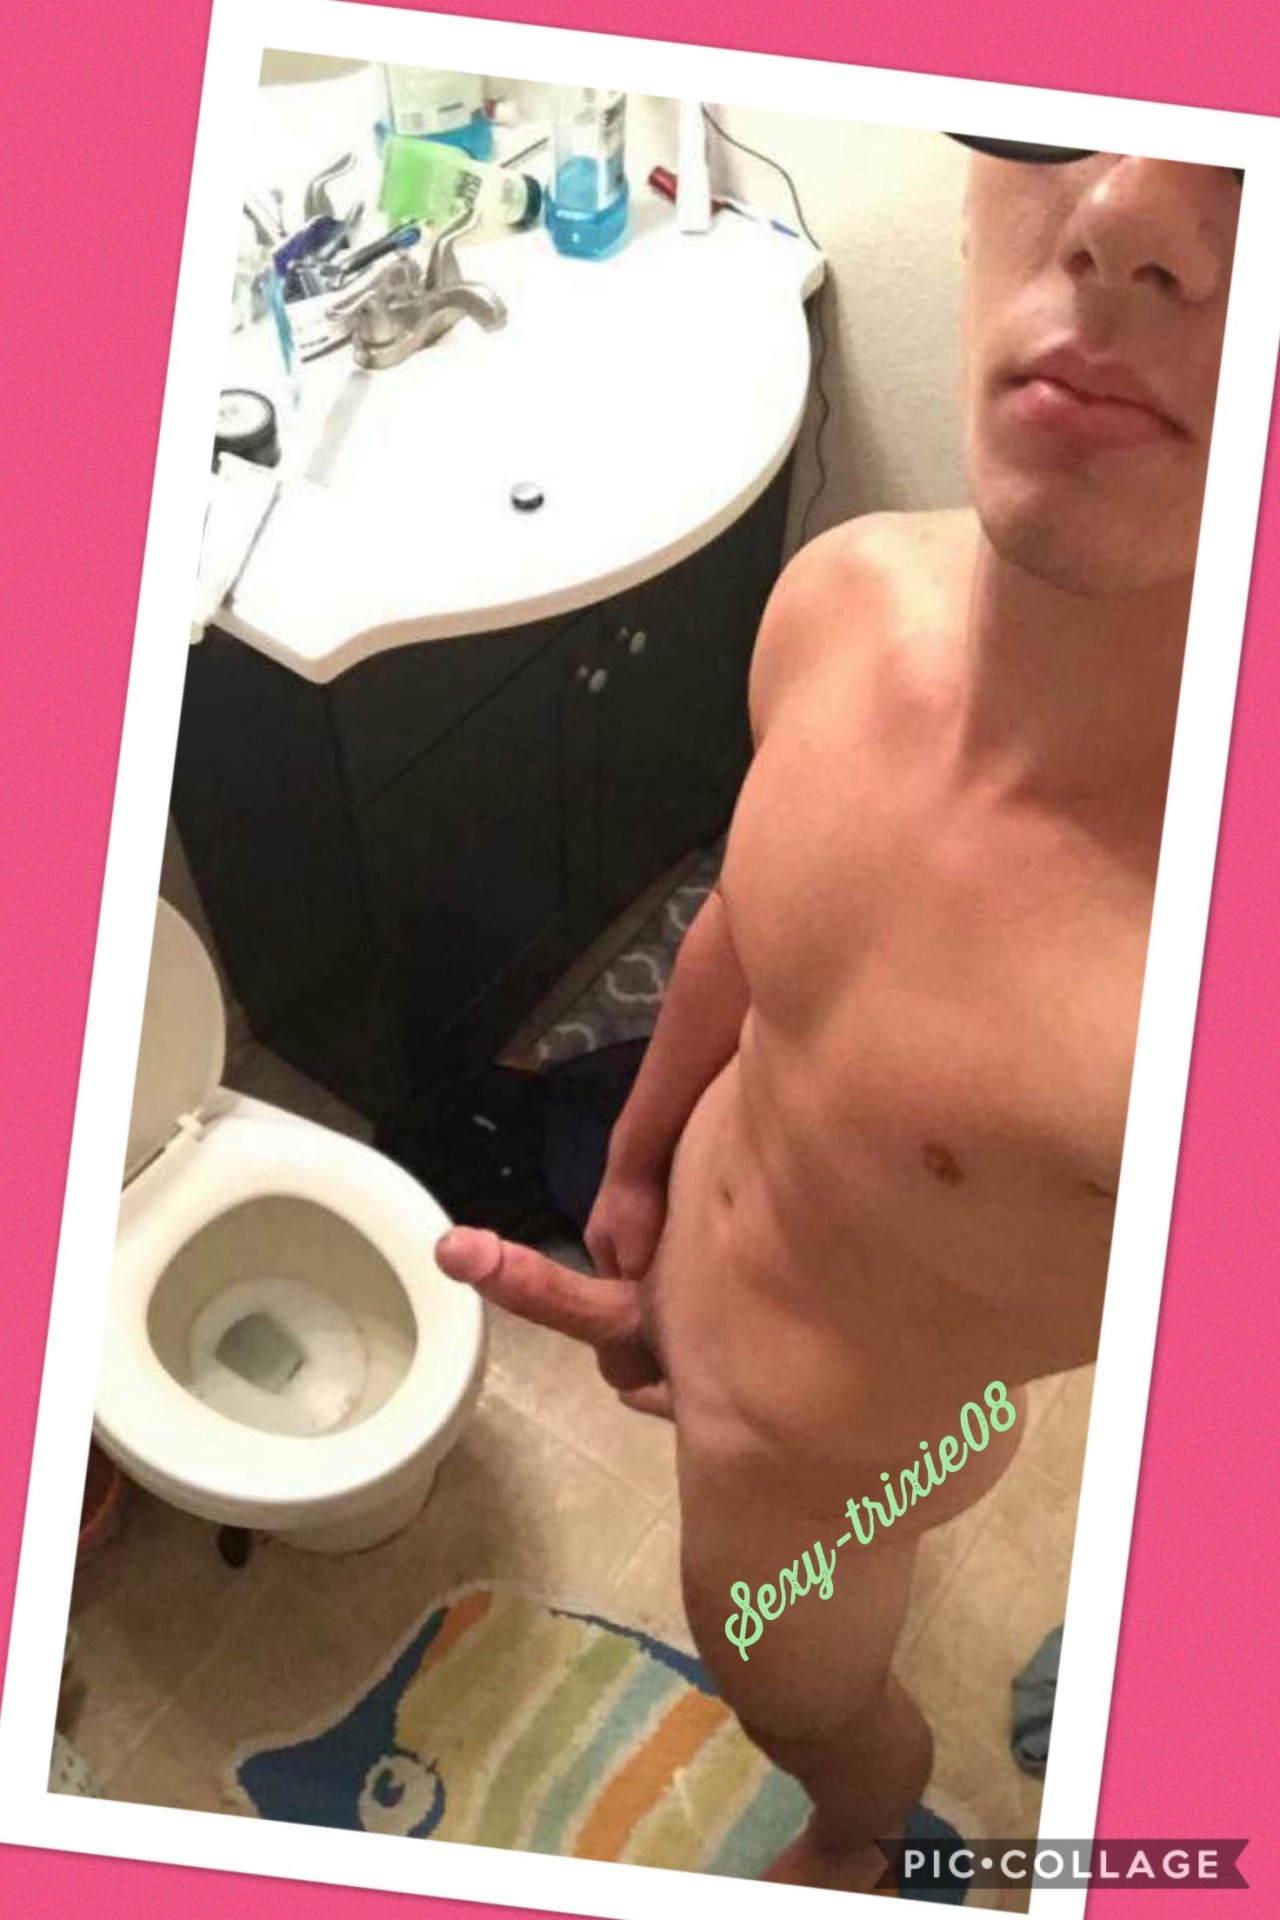 sexy-trixie08:  Fuckboy#79 Sweet as Candy🍭  wanna give him a lil Lick? 💋 only